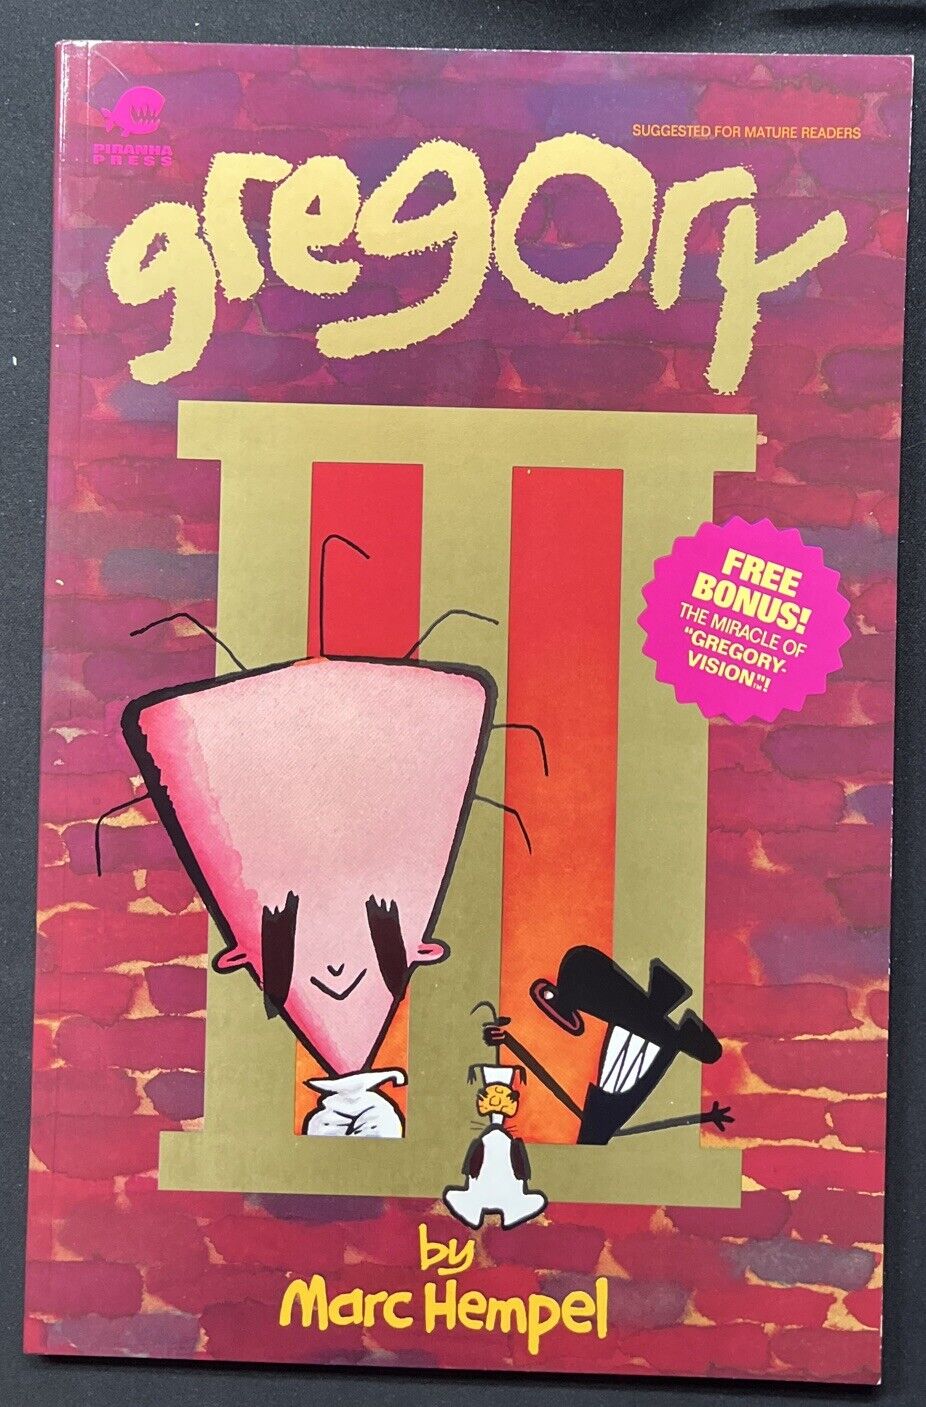 Gregory the Third by Marc Hempel Trade Paperback Very Fine